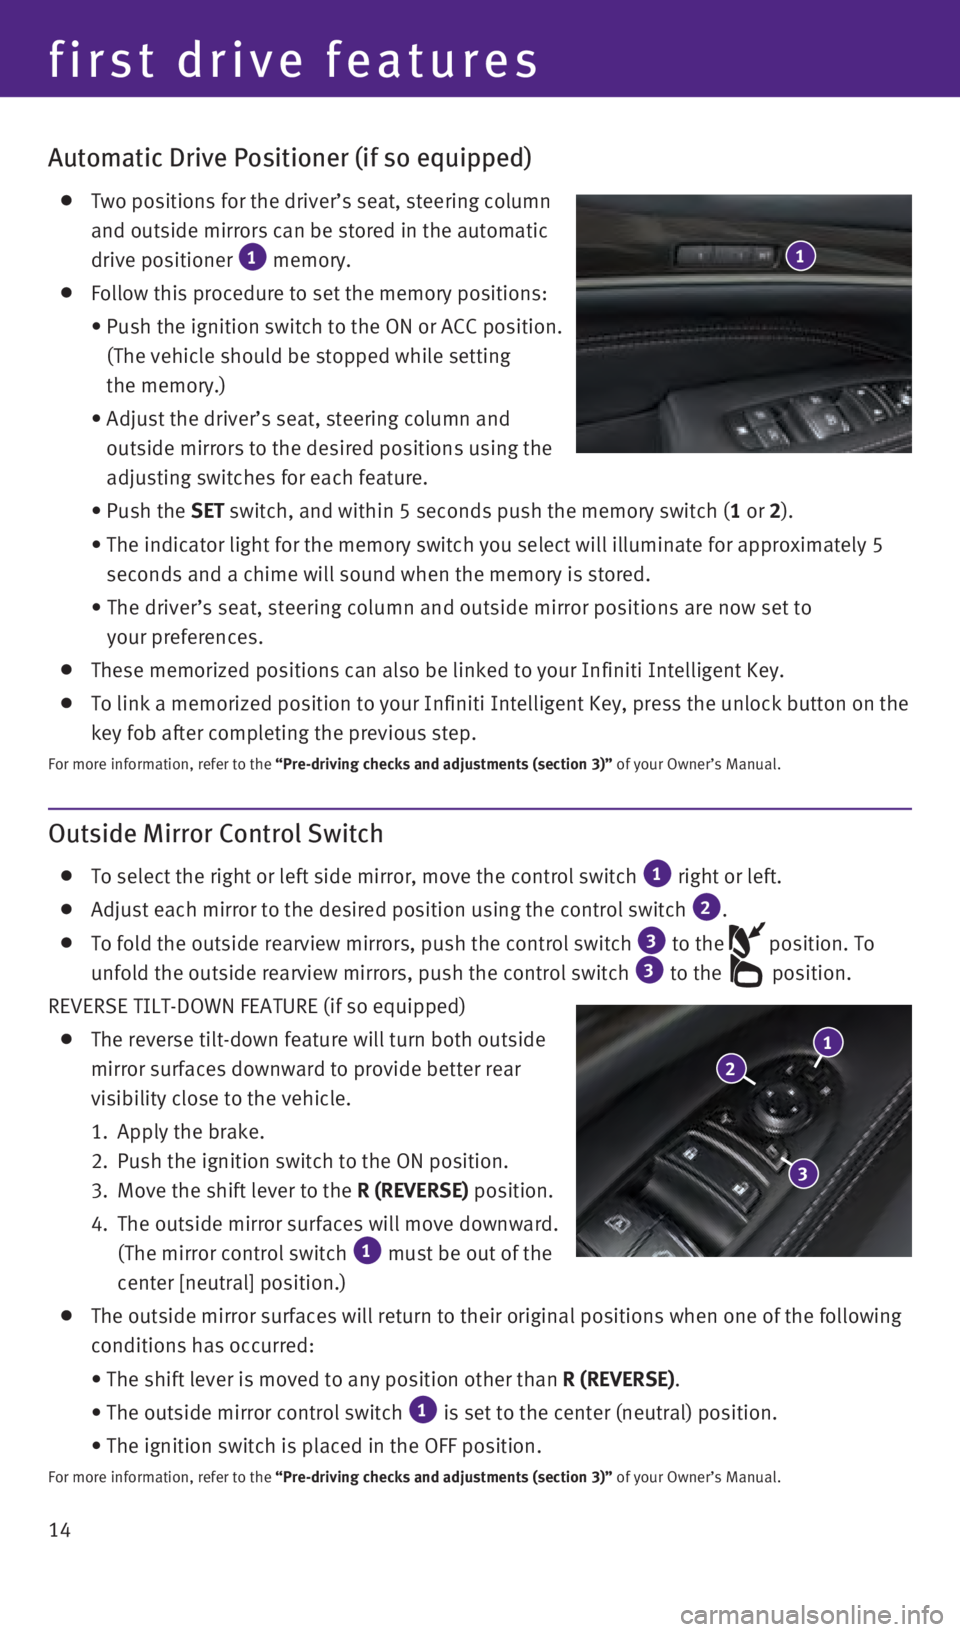 INFINITI QX60 2016  Quick Reference Guide 14
Automatic Drive Positioner (if so equipped)
    Two positions for the driver’s seat, steering column 
and outside mirrors can be stored in the automatic 
drive positioner 
1 memory.
  Follow this